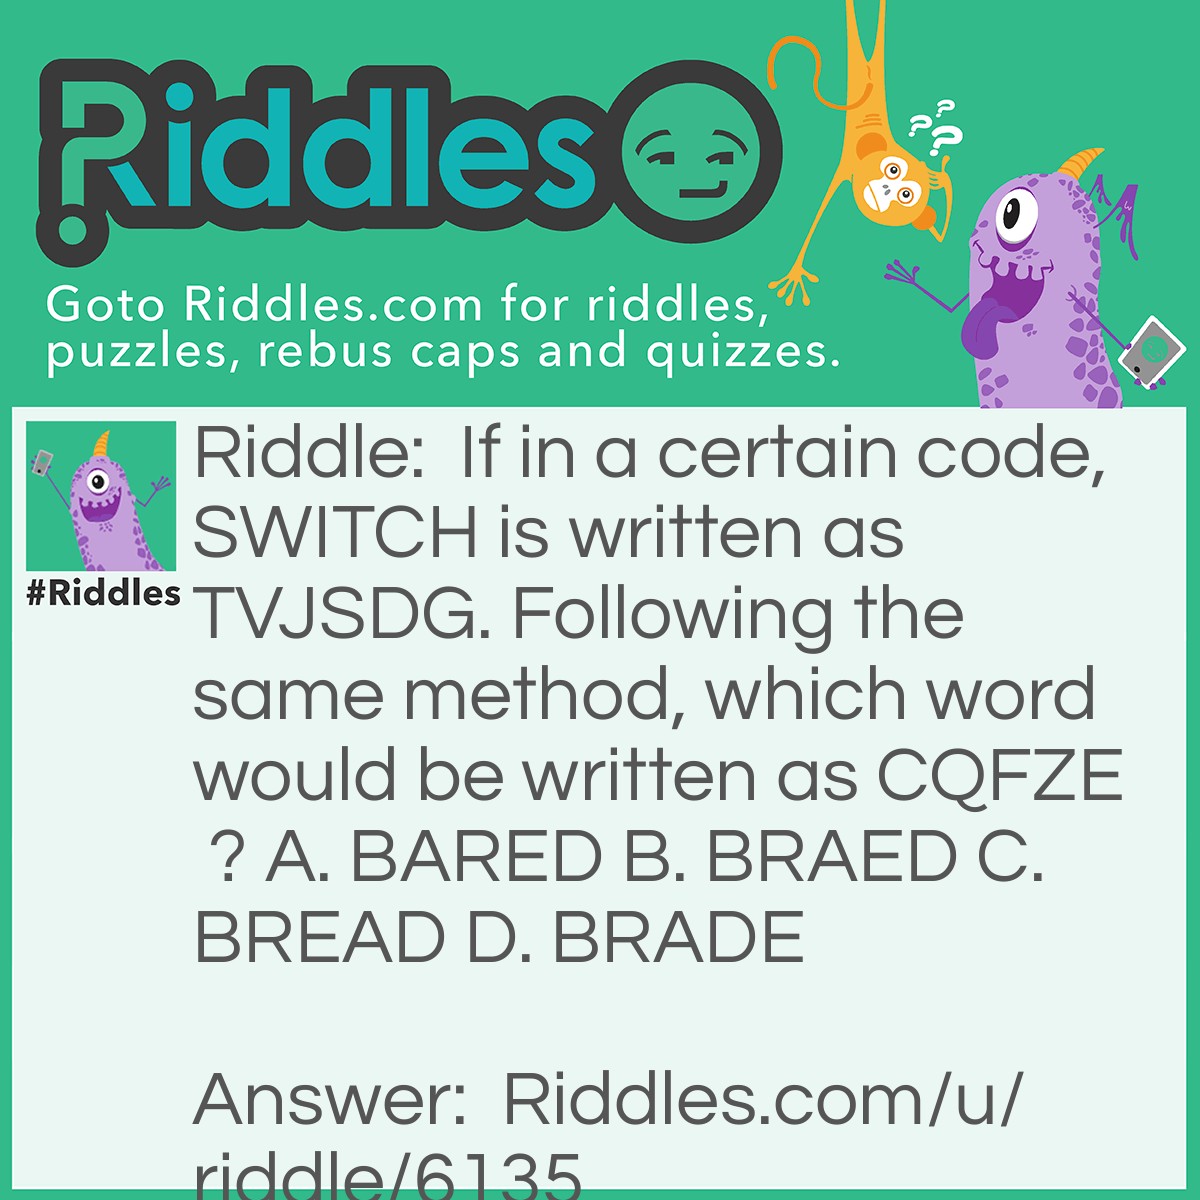 Riddle: If in a certain code, SWITCH is written as TVJSDG. Following the same method, which word would be written as CQFZE ? A. BARED B. BRAED C. BREAD D. BRADE Answer: C. BREAD